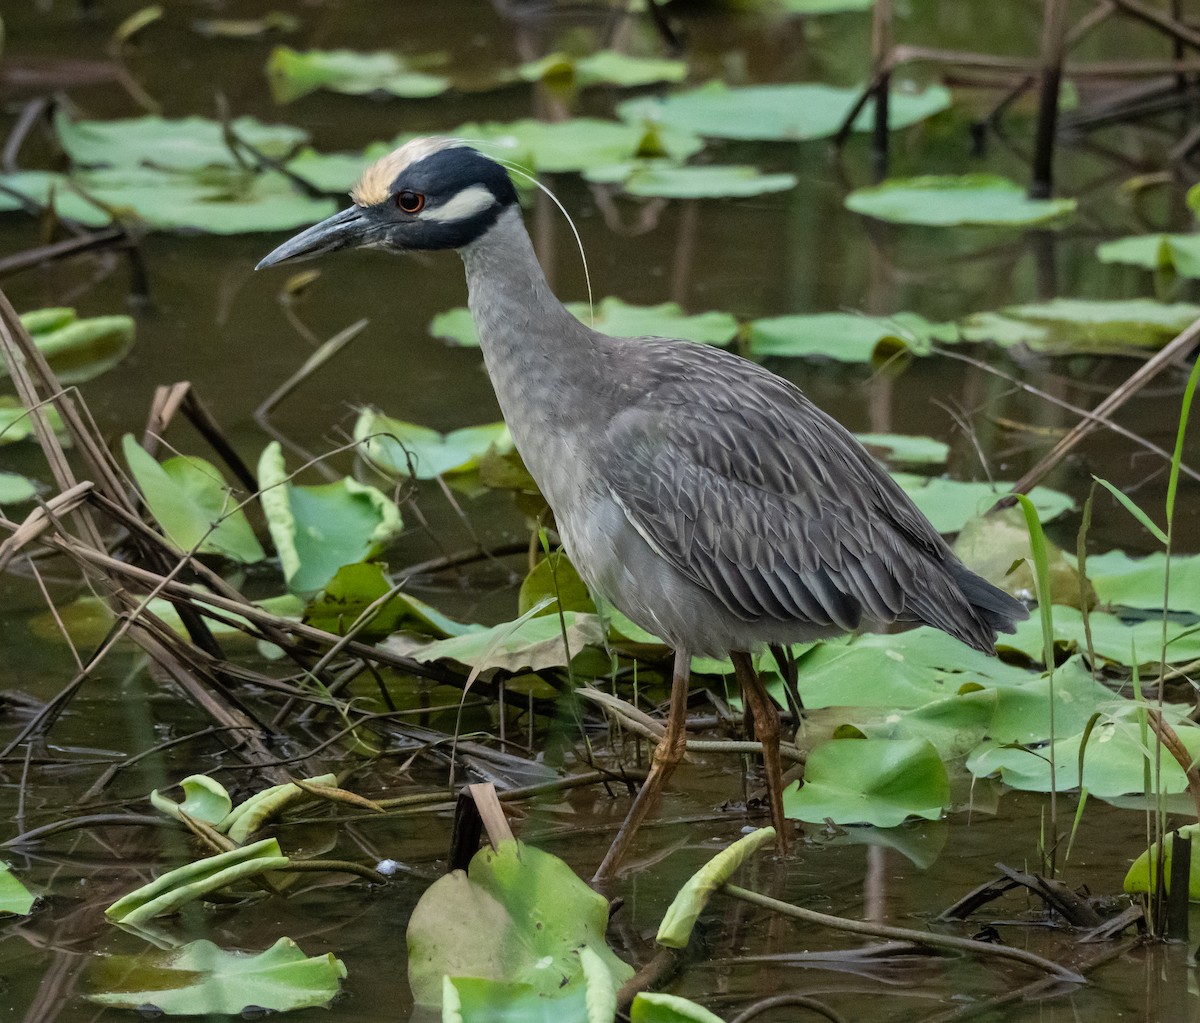 Yellow-crowned Night Heron - Anthea Gotto